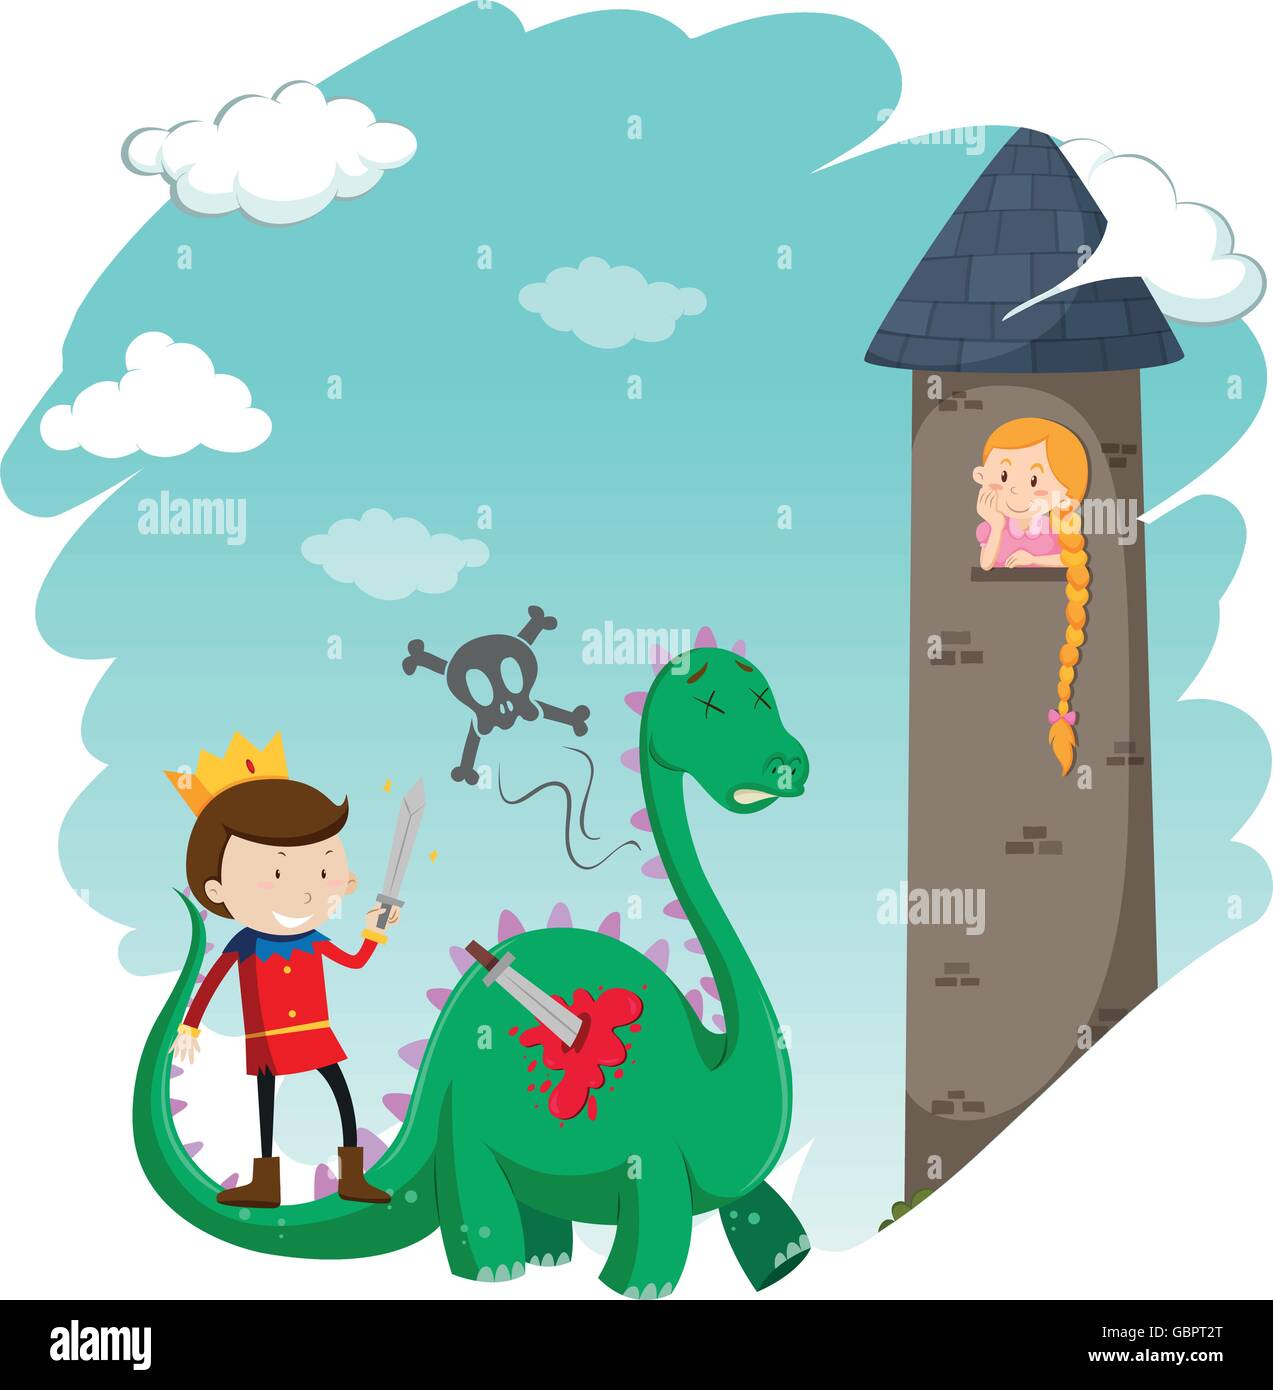 Scene from fairytales with prince and drogon illustration Stock Vector